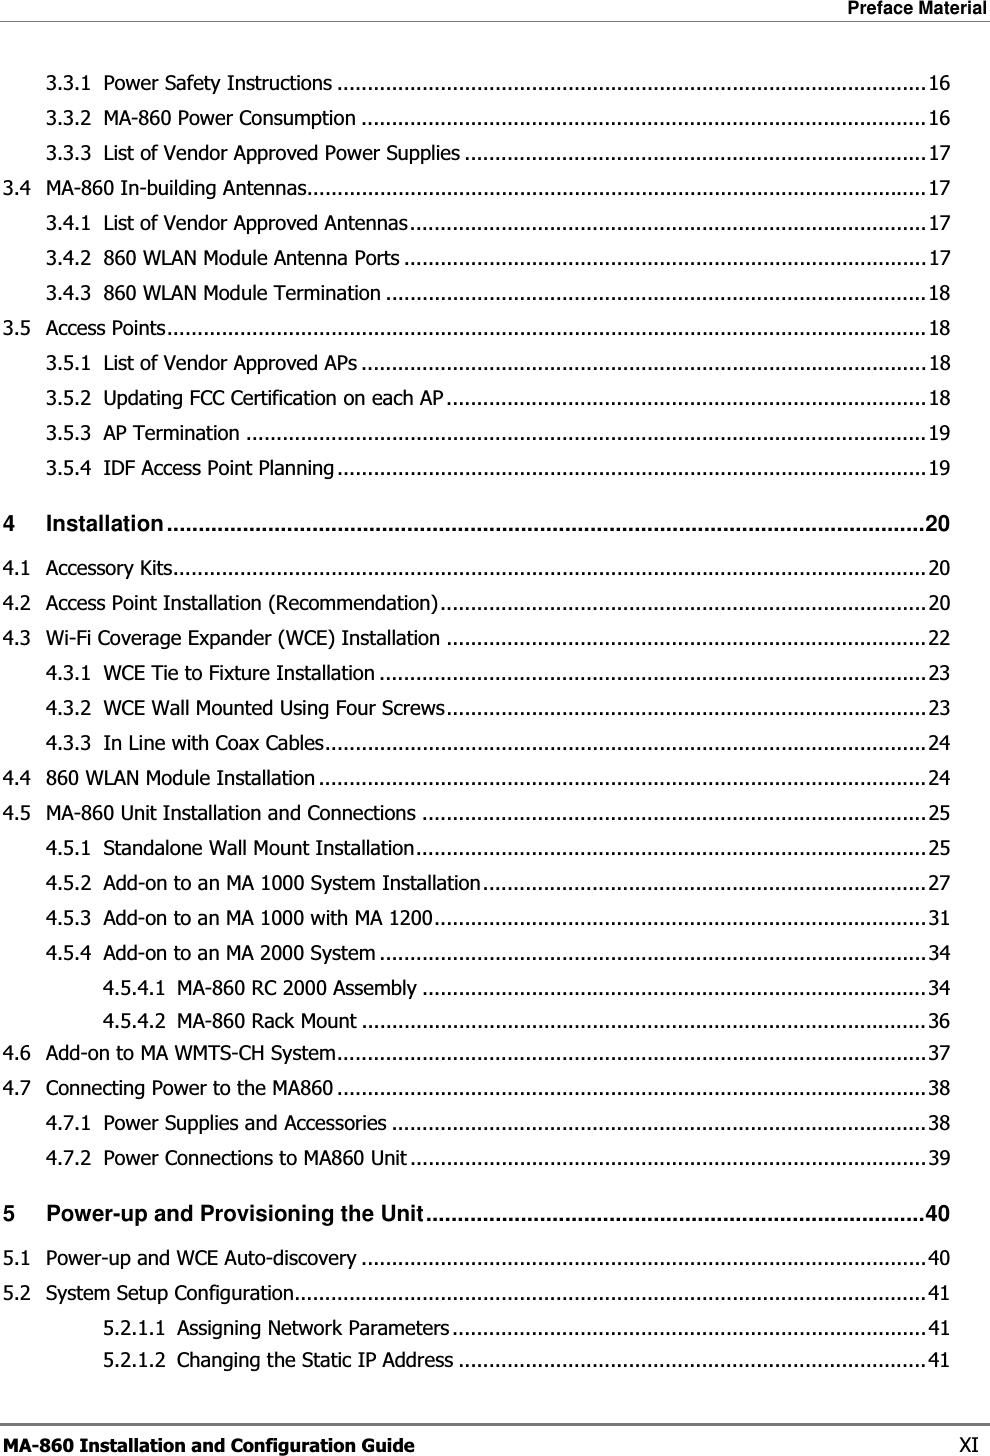 Preface Material  MA-860 Installation and Configuration Guide    XI 3.3.1 Power Safety Instructions .................................................................................................163.3.2 MA-860 Power Consumption .............................................................................................163.3.3 List of Vendor Approved Power Supplies ............................................................................173.4 MA-860 In-building Antennas......................................................................................................173.4.1 List of Vendor Approved Antennas.....................................................................................173.4.2 860 WLAN Module Antenna Ports ......................................................................................173.4.3 860 WLAN Module Termination .........................................................................................183.5 Access Points.............................................................................................................................183.5.1 List of Vendor Approved APs .............................................................................................183.5.2 Updating FCC Certification on each AP ...............................................................................183.5.3 AP Termination ................................................................................................................193.5.4 IDF Access Point Planning .................................................................................................194 Installation........................................................................................................................204.1 Accessory Kits............................................................................................................................204.2 Access Point Installation (Recommendation)................................................................................204.3 Wi-Fi Coverage Expander (WCE) Installation ...............................................................................224.3.1 WCE Tie to Fixture Installation ..........................................................................................234.3.2 WCE Wall Mounted Using Four Screws...............................................................................234.3.3 In Line with Coax Cables...................................................................................................244.4 860 WLAN Module Installation ....................................................................................................244.5 MA-860 Unit Installation and Connections ...................................................................................254.5.1 Standalone Wall Mount Installation....................................................................................254.5.2 Add-on to an MA 1000 System Installation.........................................................................274.5.3 Add-on to an MA 1000 with MA 1200.................................................................................314.5.4 Add-on to an MA 2000 System ..........................................................................................344.5.4.1 MA-860 RC 2000 Assembly ...................................................................................344.5.4.2 MA-860 Rack Mount .............................................................................................364.6 Add-on to MA WMTS-CH System.................................................................................................374.7 Connecting Power to the MA860 .................................................................................................384.7.1 Power Supplies and Accessories ........................................................................................384.7.2 Power Connections to MA860 Unit .....................................................................................395 Power-up and Provisioning the Unit...............................................................................405.1 Power-up and WCE Auto-discovery .............................................................................................405.2 System Setup Configuration........................................................................................................415.2.1.1 Assigning Network Parameters ..............................................................................415.2.1.2 Changing the Static IP Address .............................................................................41